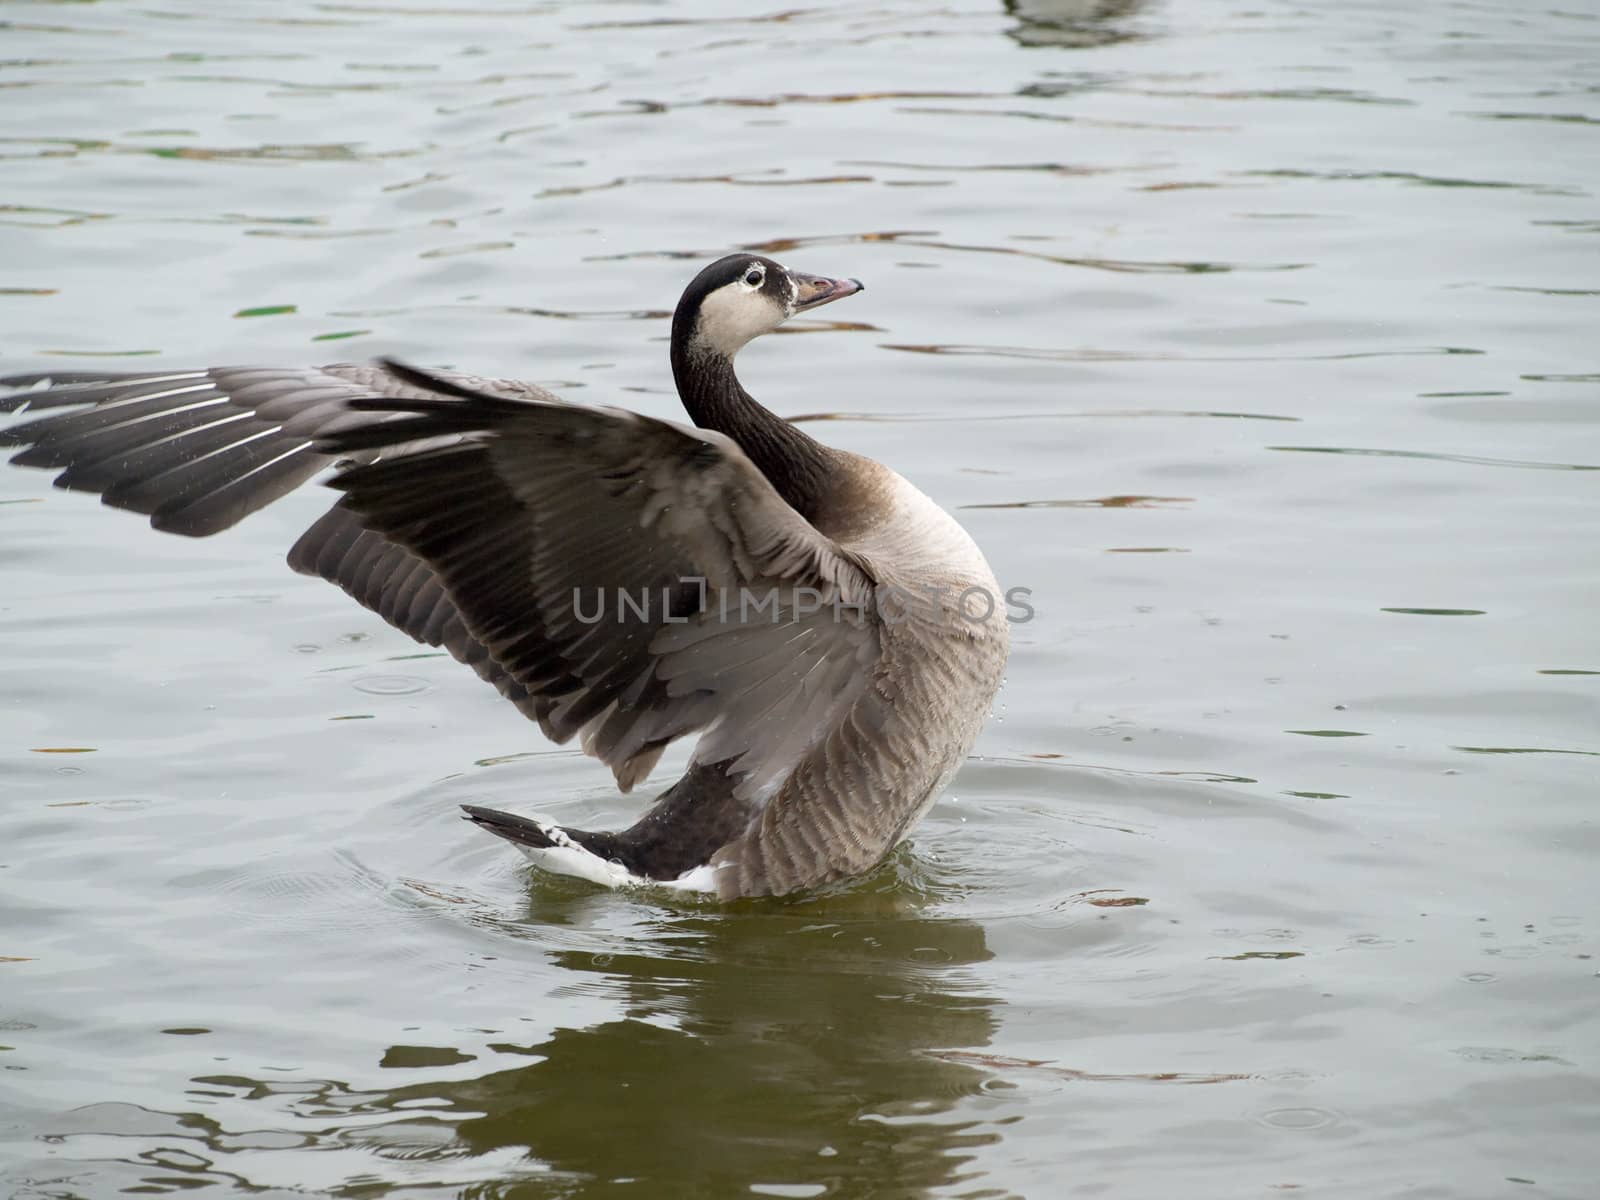 Goose Flapping its Wings by timbphotography